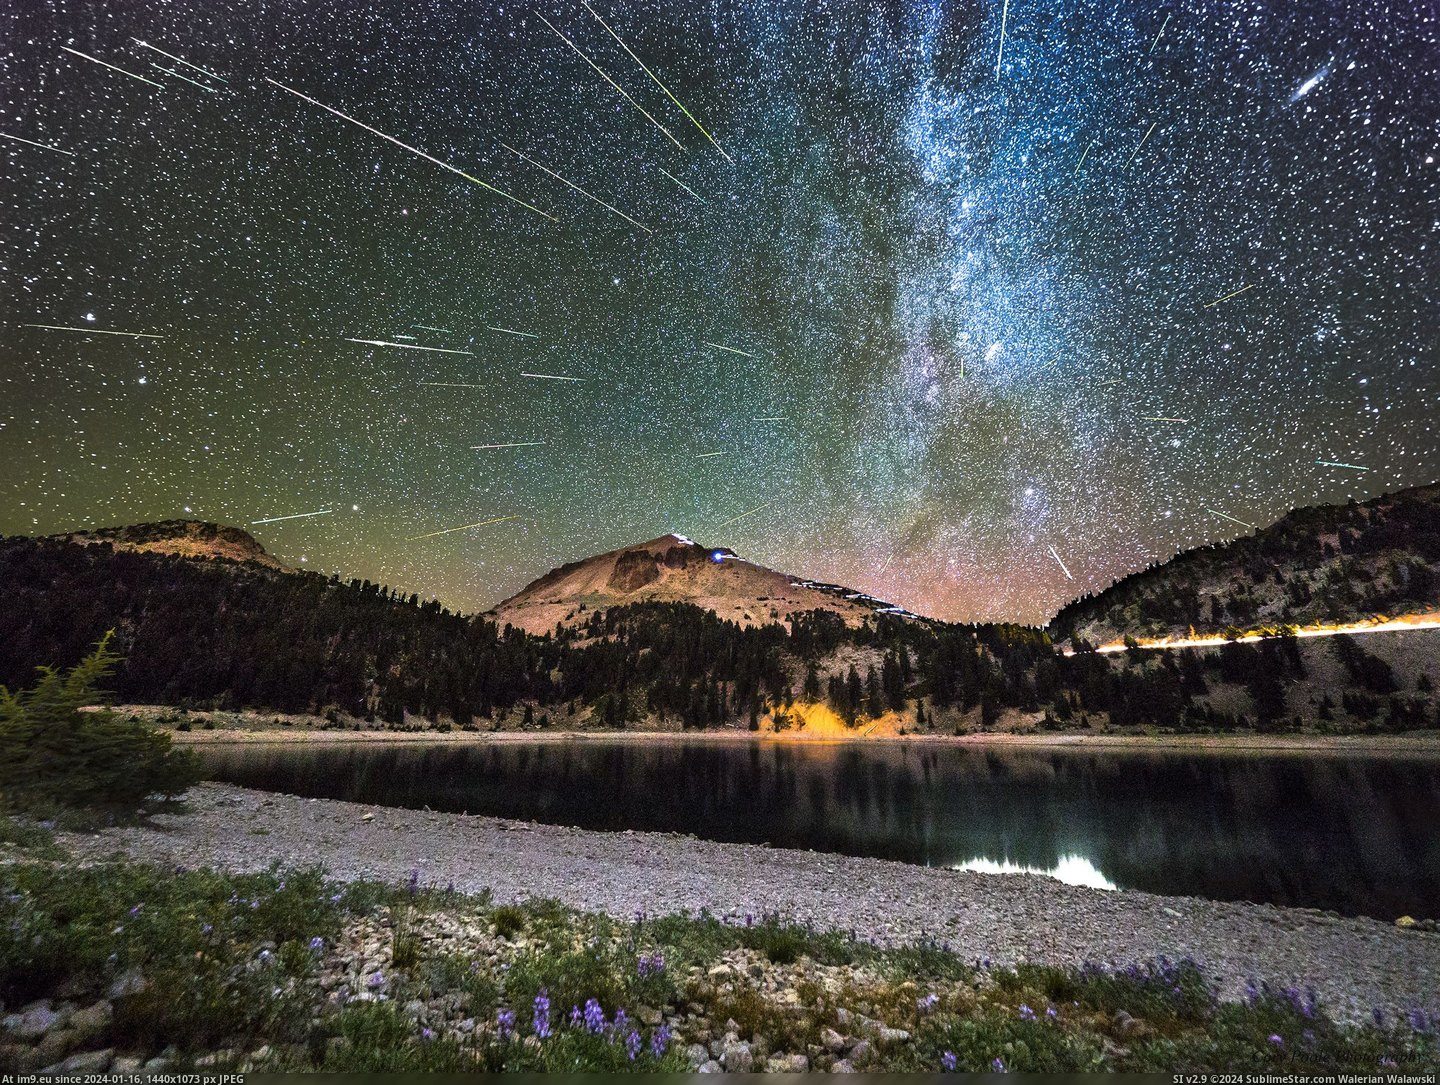 #Years #Happy #Northern #Lassen #Composite #Peak #Eve #Fireworks [Earthporn] Happy New Years Eve! Here's some celestial fireworks, a composite of 40 meteors over Lassen Peak in Northern Califor Pic. (Image of album My r/EARTHPORN favs))